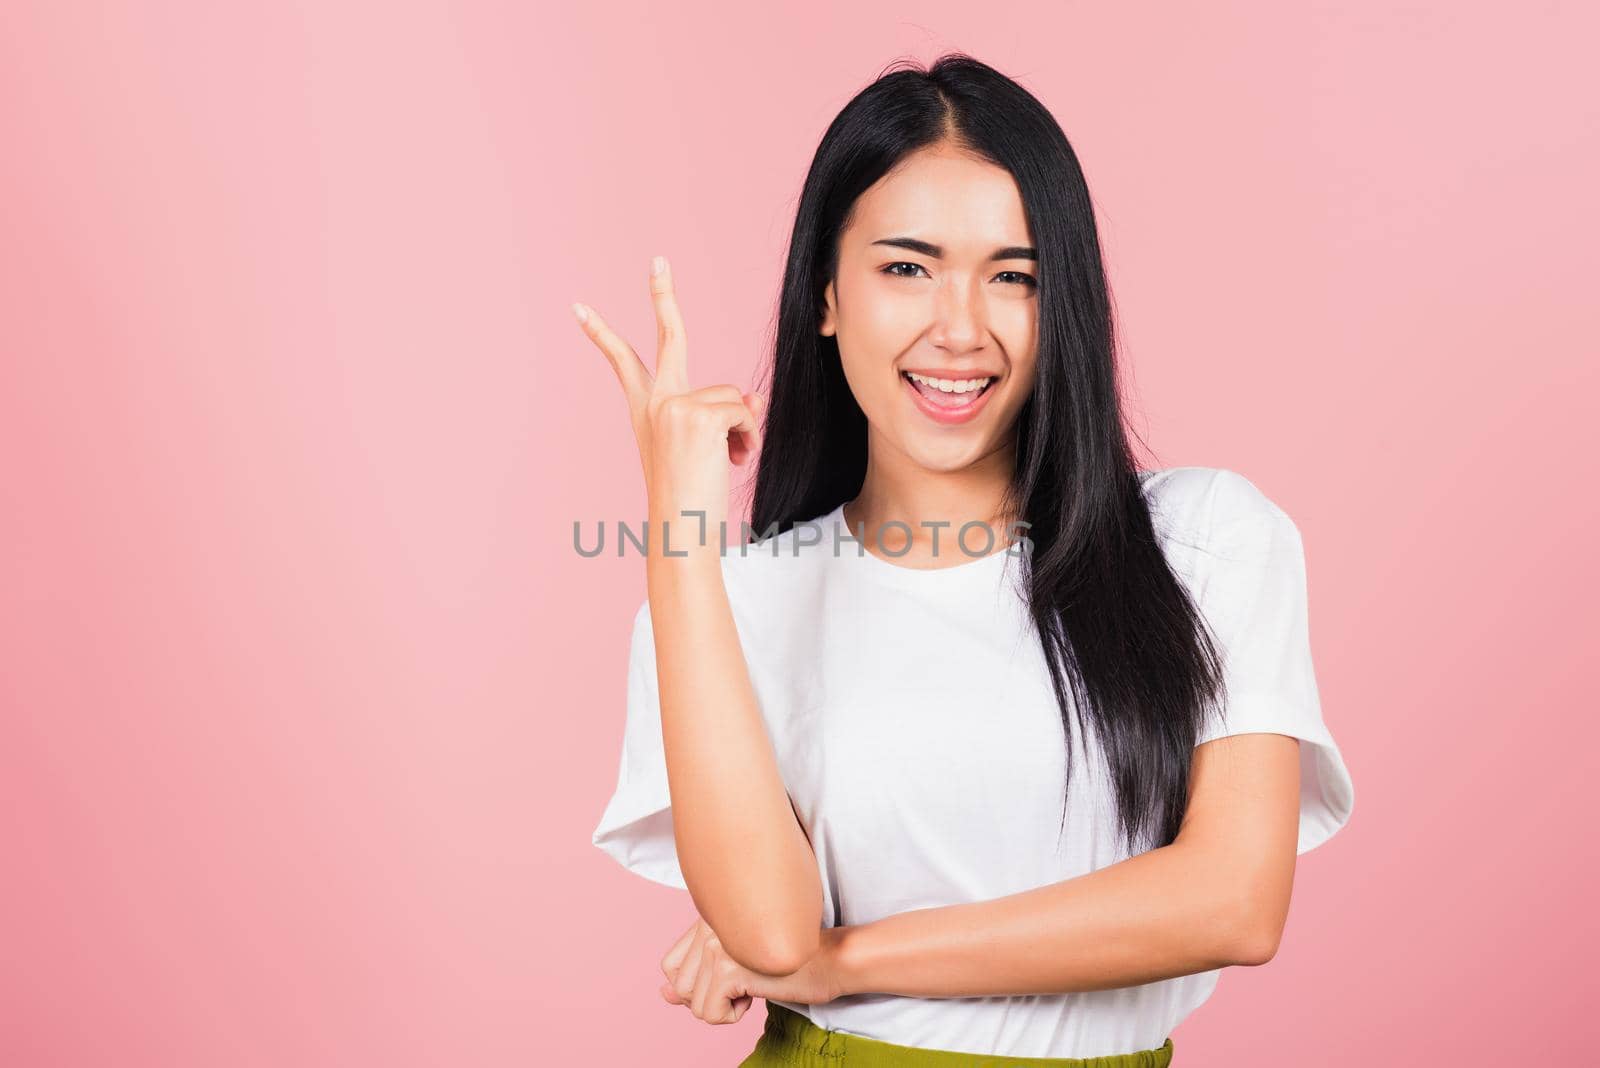 Asian happy portrait beautiful cute young woman teen smile standing show finger making v-sign victory sign gesture side away looking to camera studio shot isolated on pink background with copy space